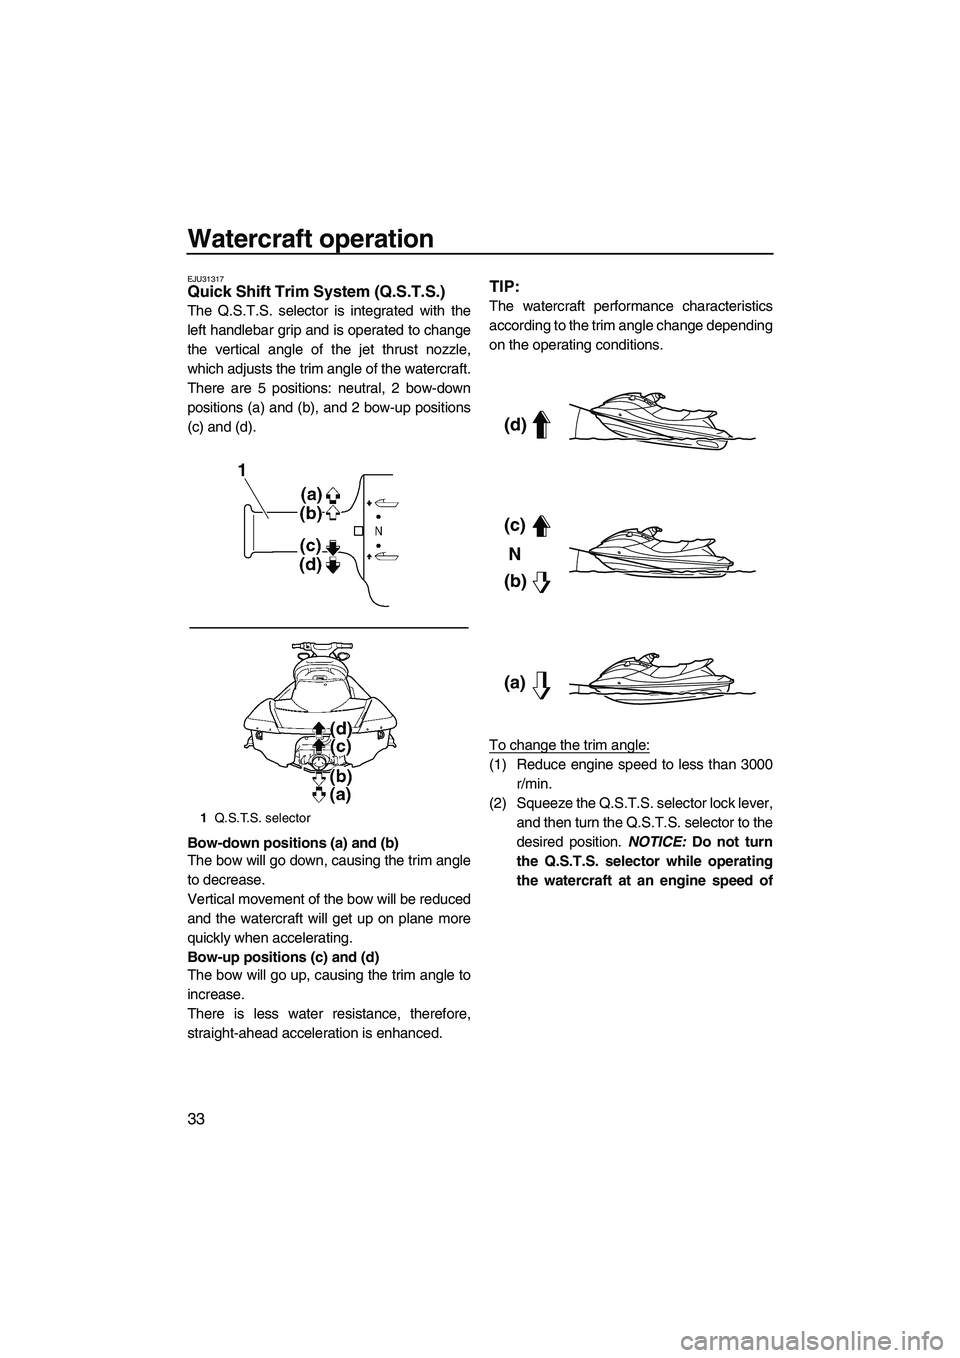 YAMAHA SVHO 2010 Owners Guide Watercraft operation
33
EJU31317Quick Shift Trim System (Q.S.T.S.) 
The Q.S.T.S. selector is integrated with the
left handlebar grip and is operated to change
the vertical angle of the jet thrust nozz